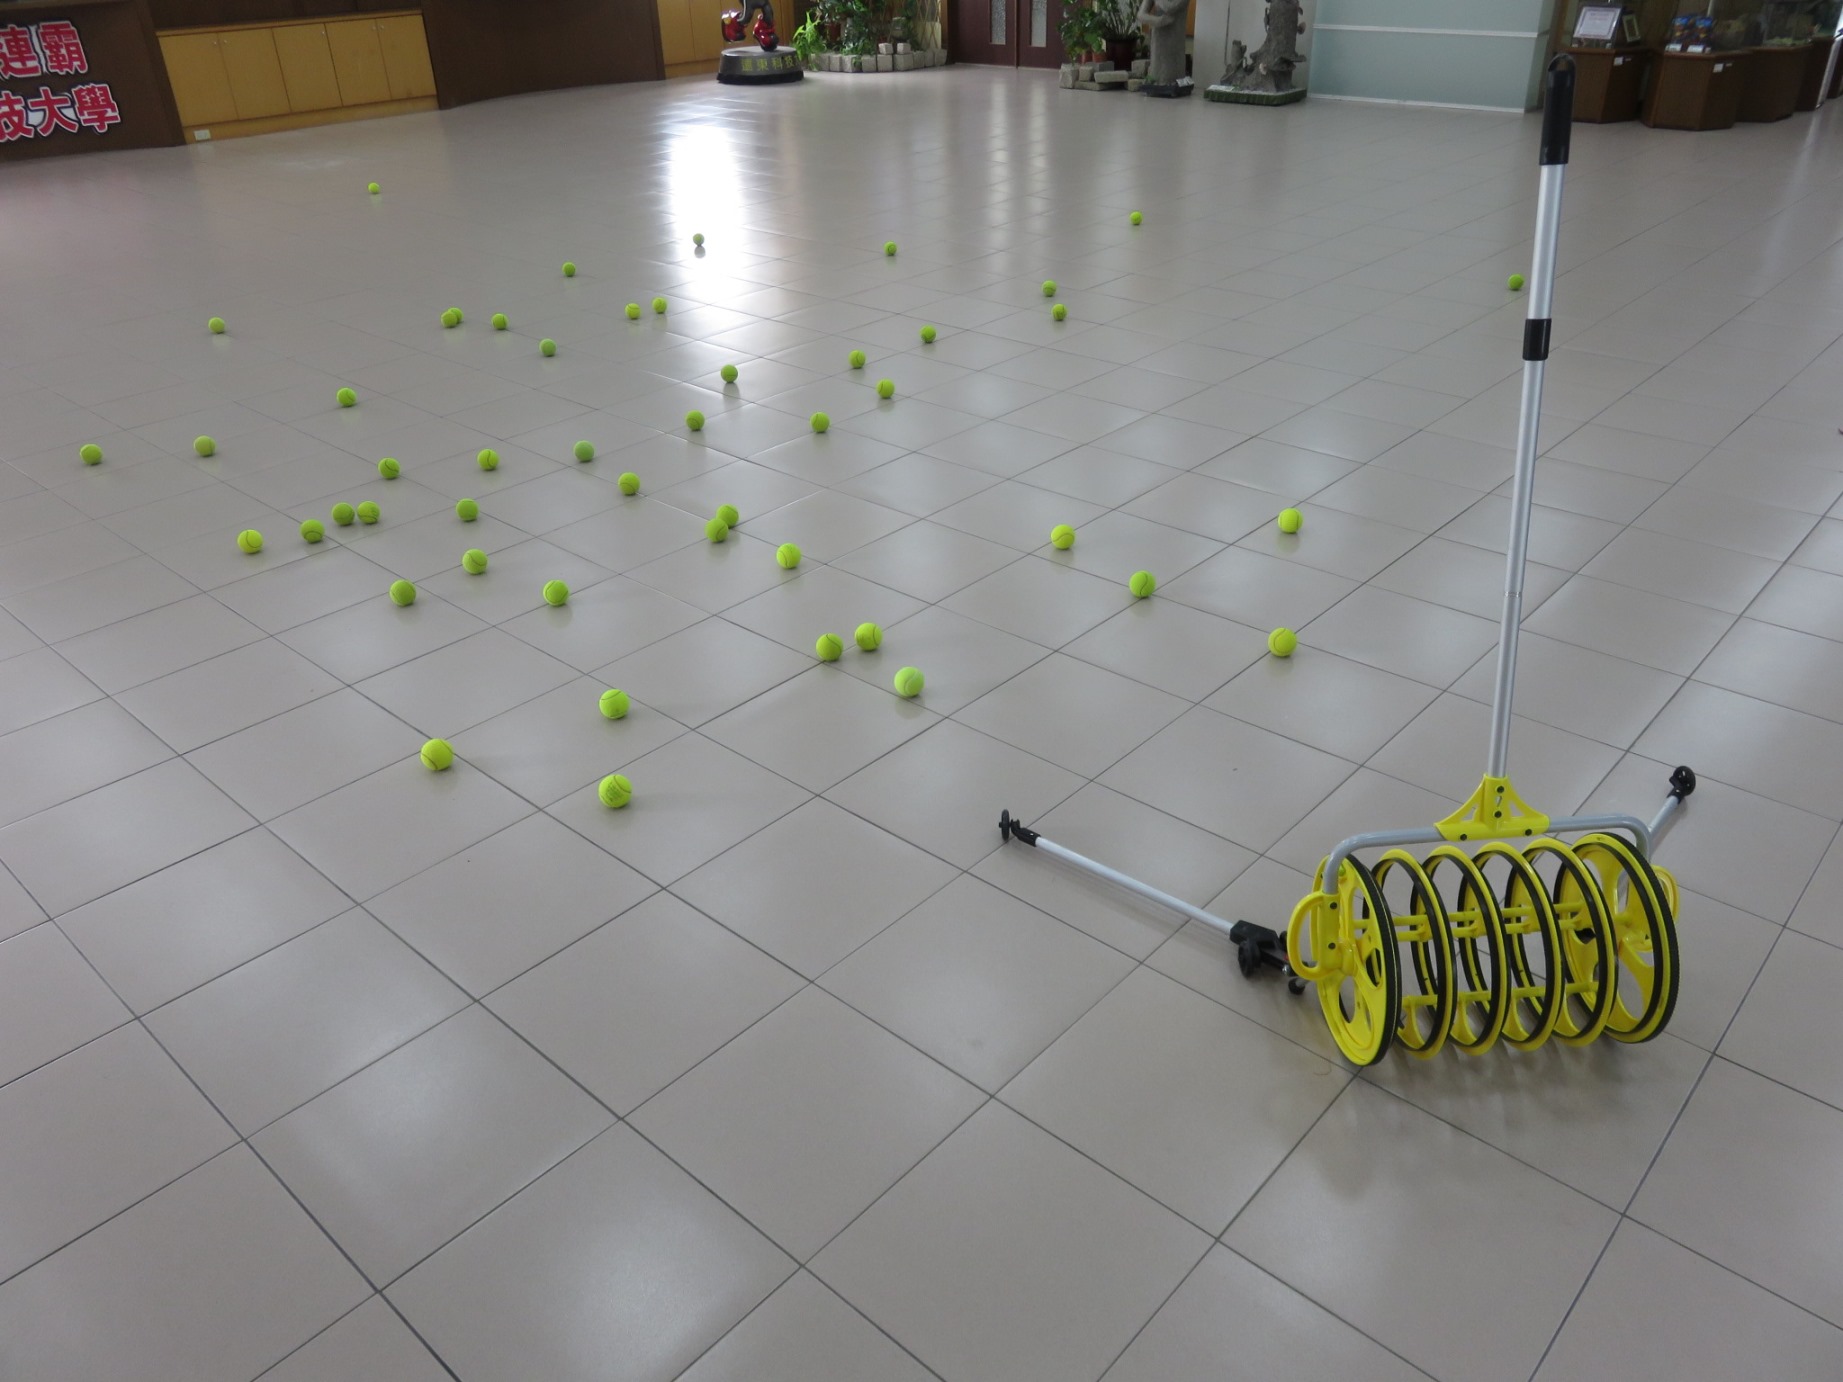 A High-Efficiency and Manpower-Saving Ball Collecting Device